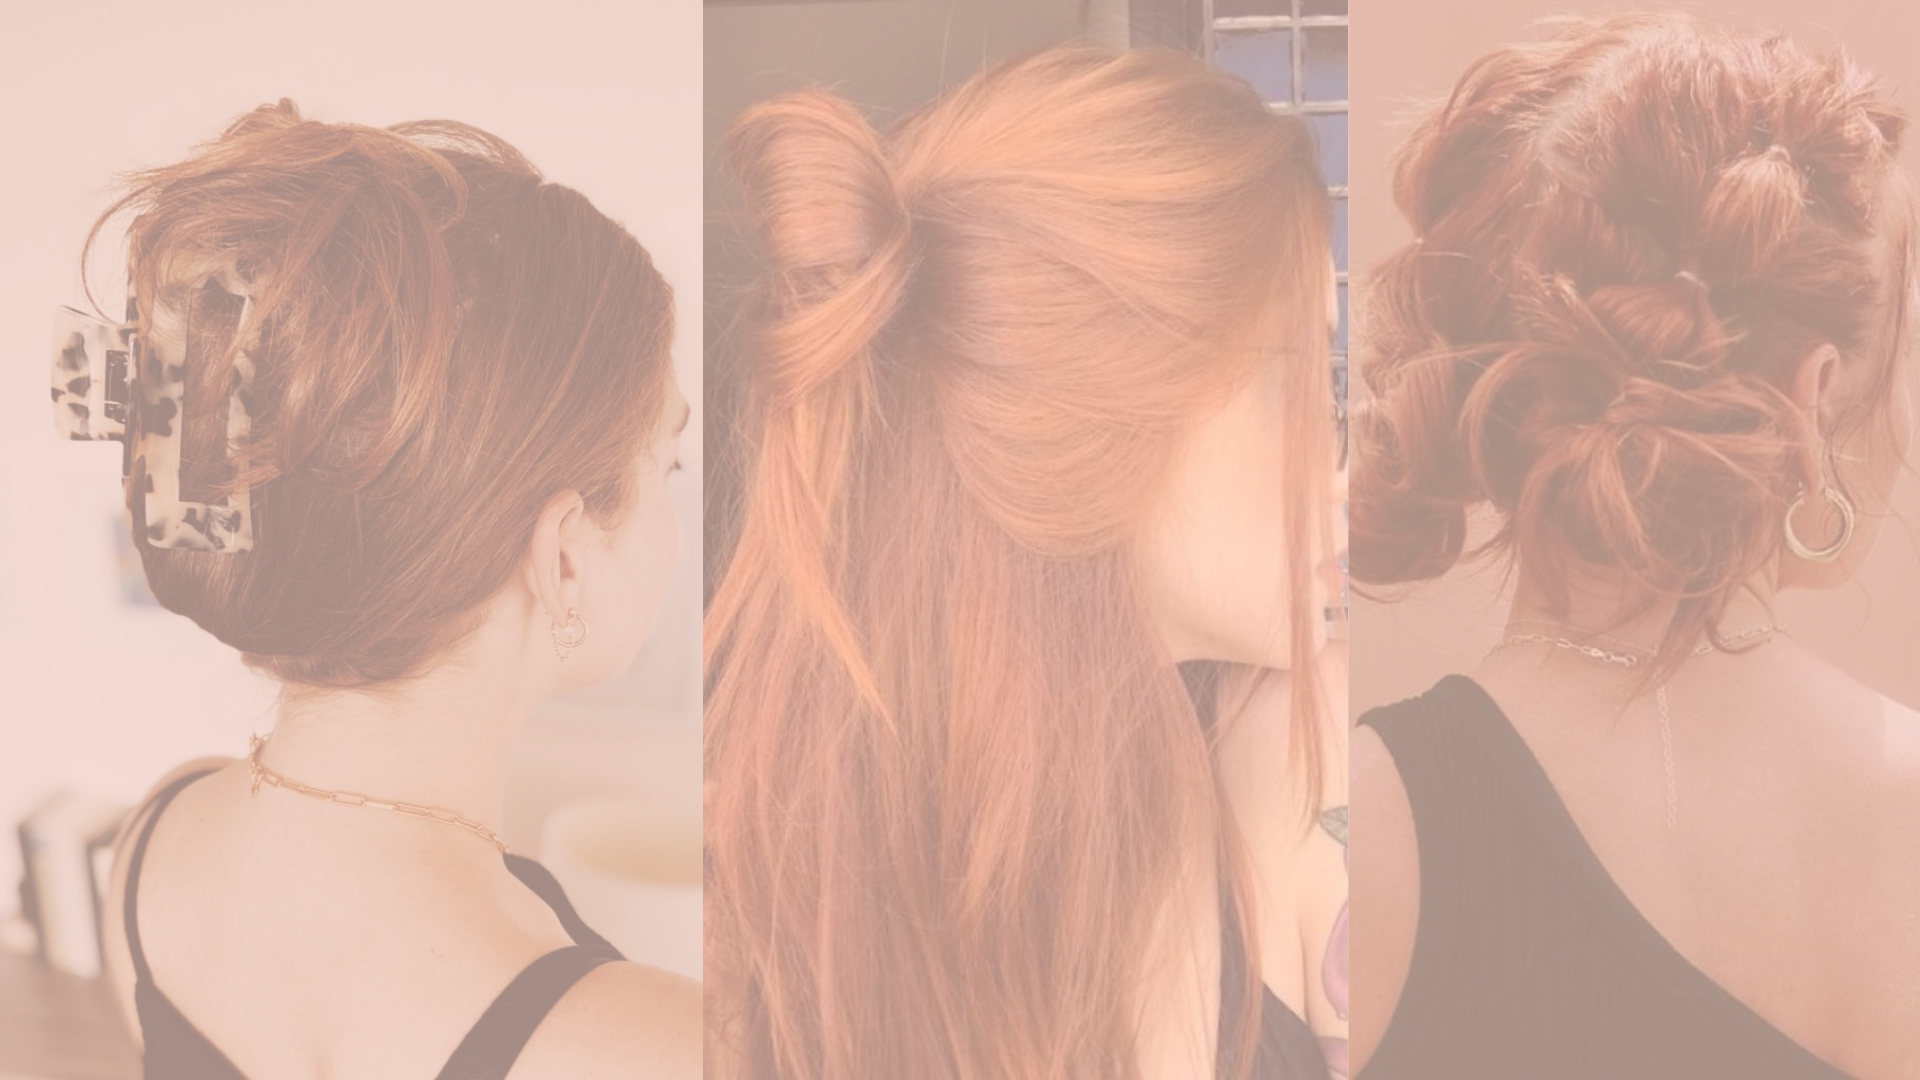 7 Easy Summer Hairstyles for Redheads When It’s Too Hot to Deal